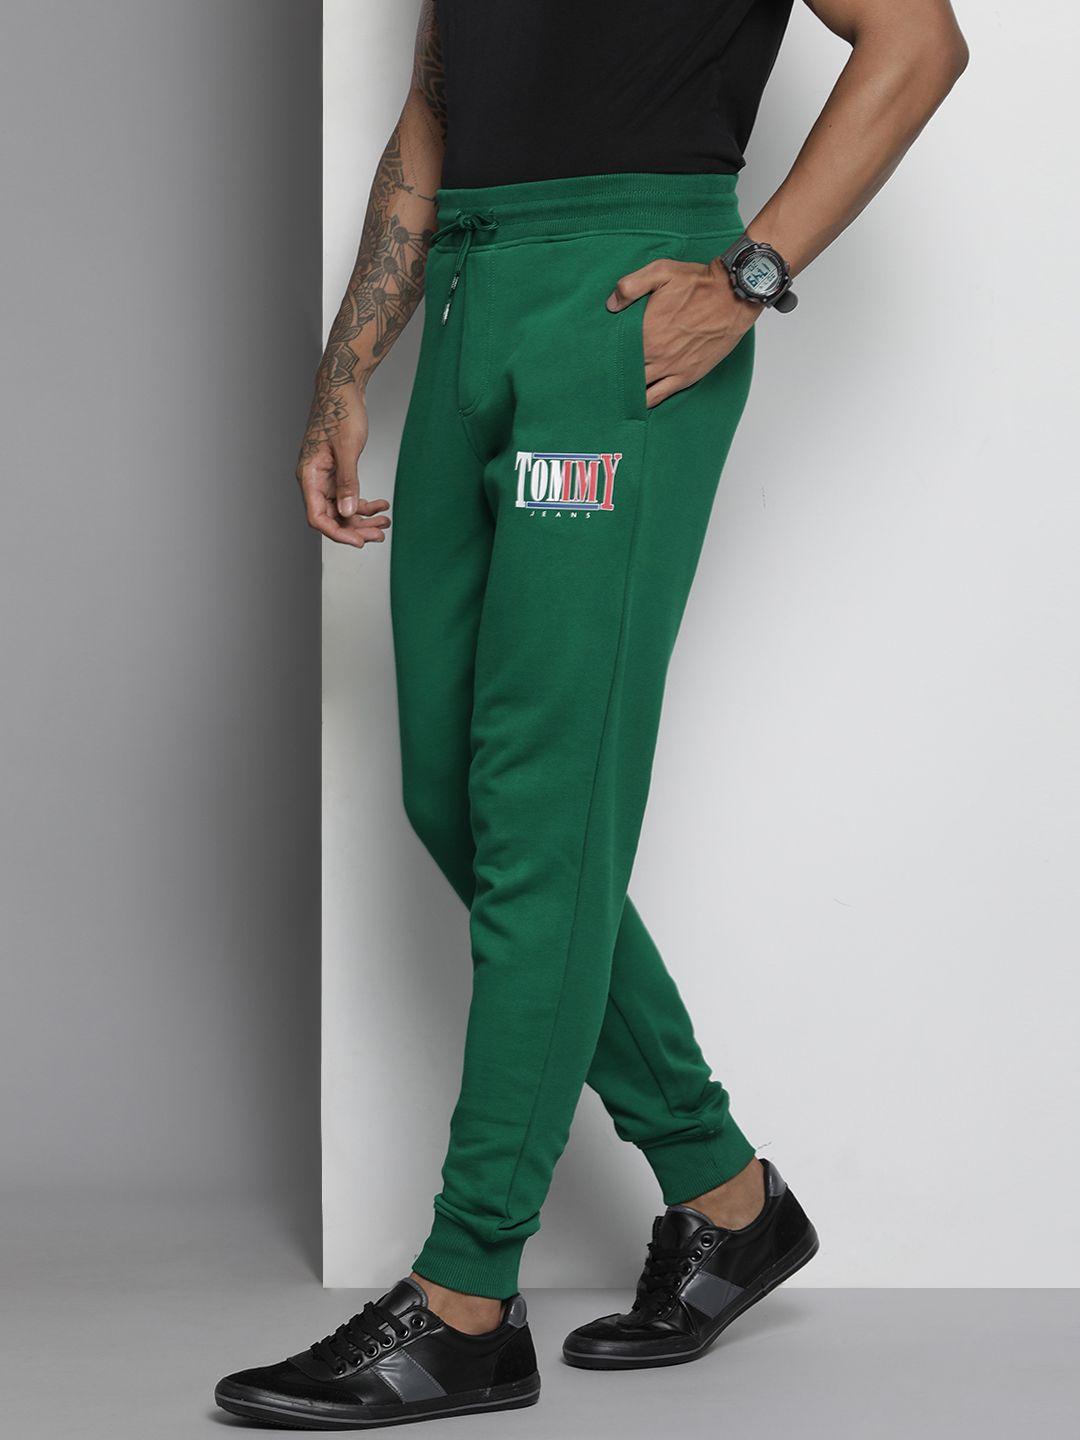 tommy hilfiger men green brand logo printed slim fit joggers trousers